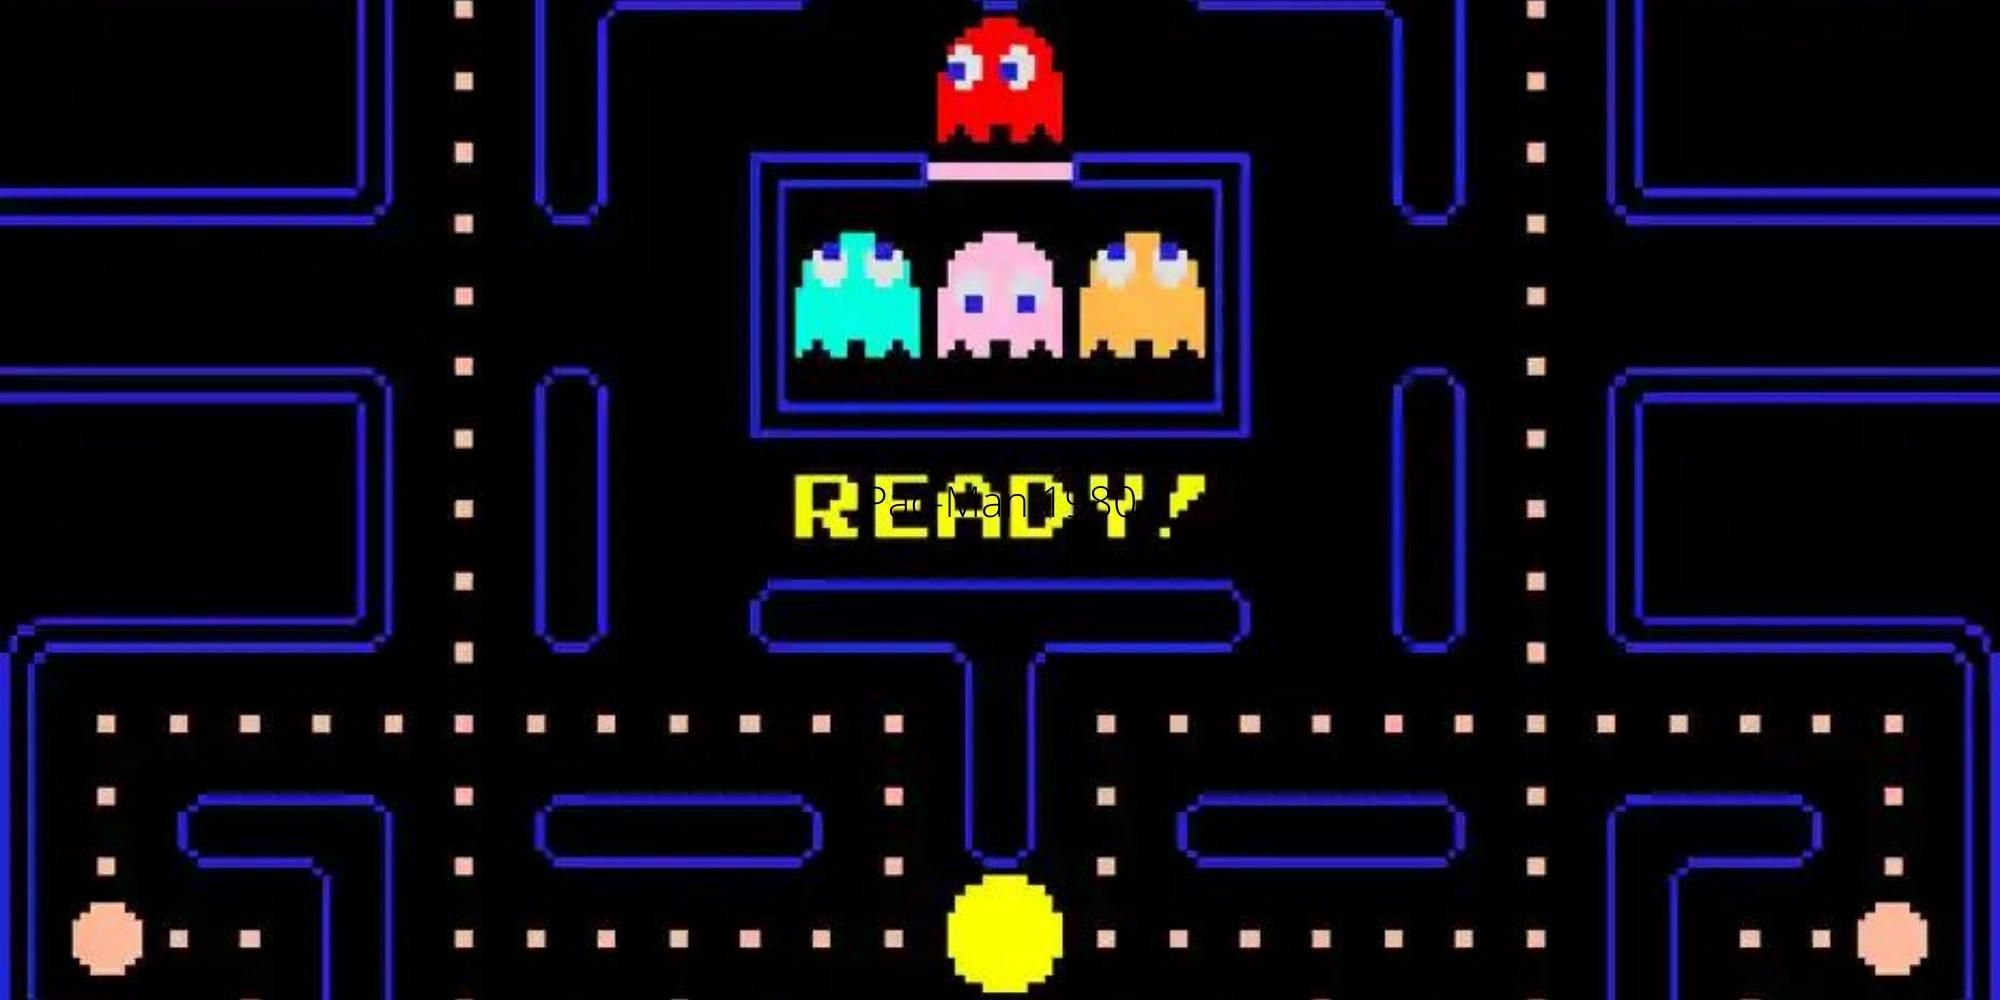 characters from Pac-Man video game